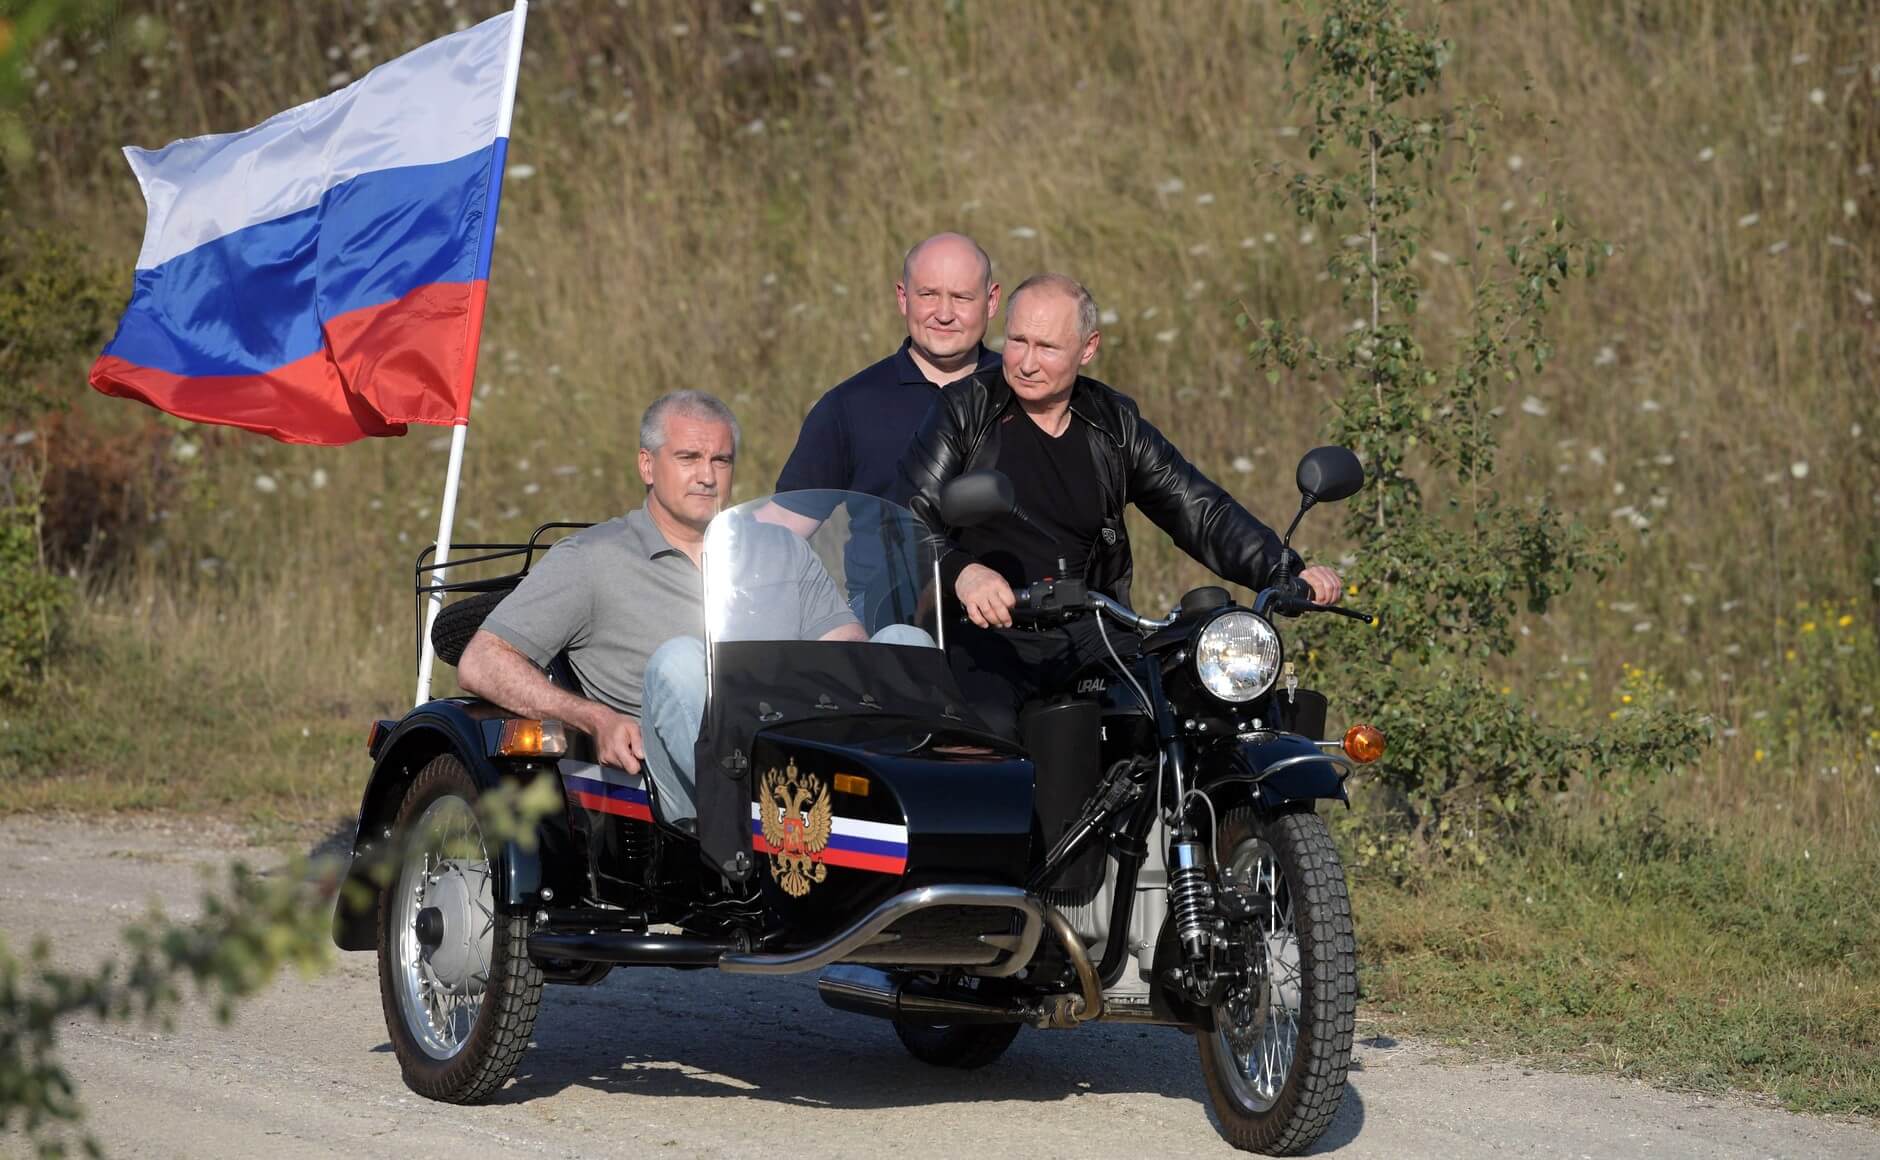 Putin on a motorcycle without a helmet